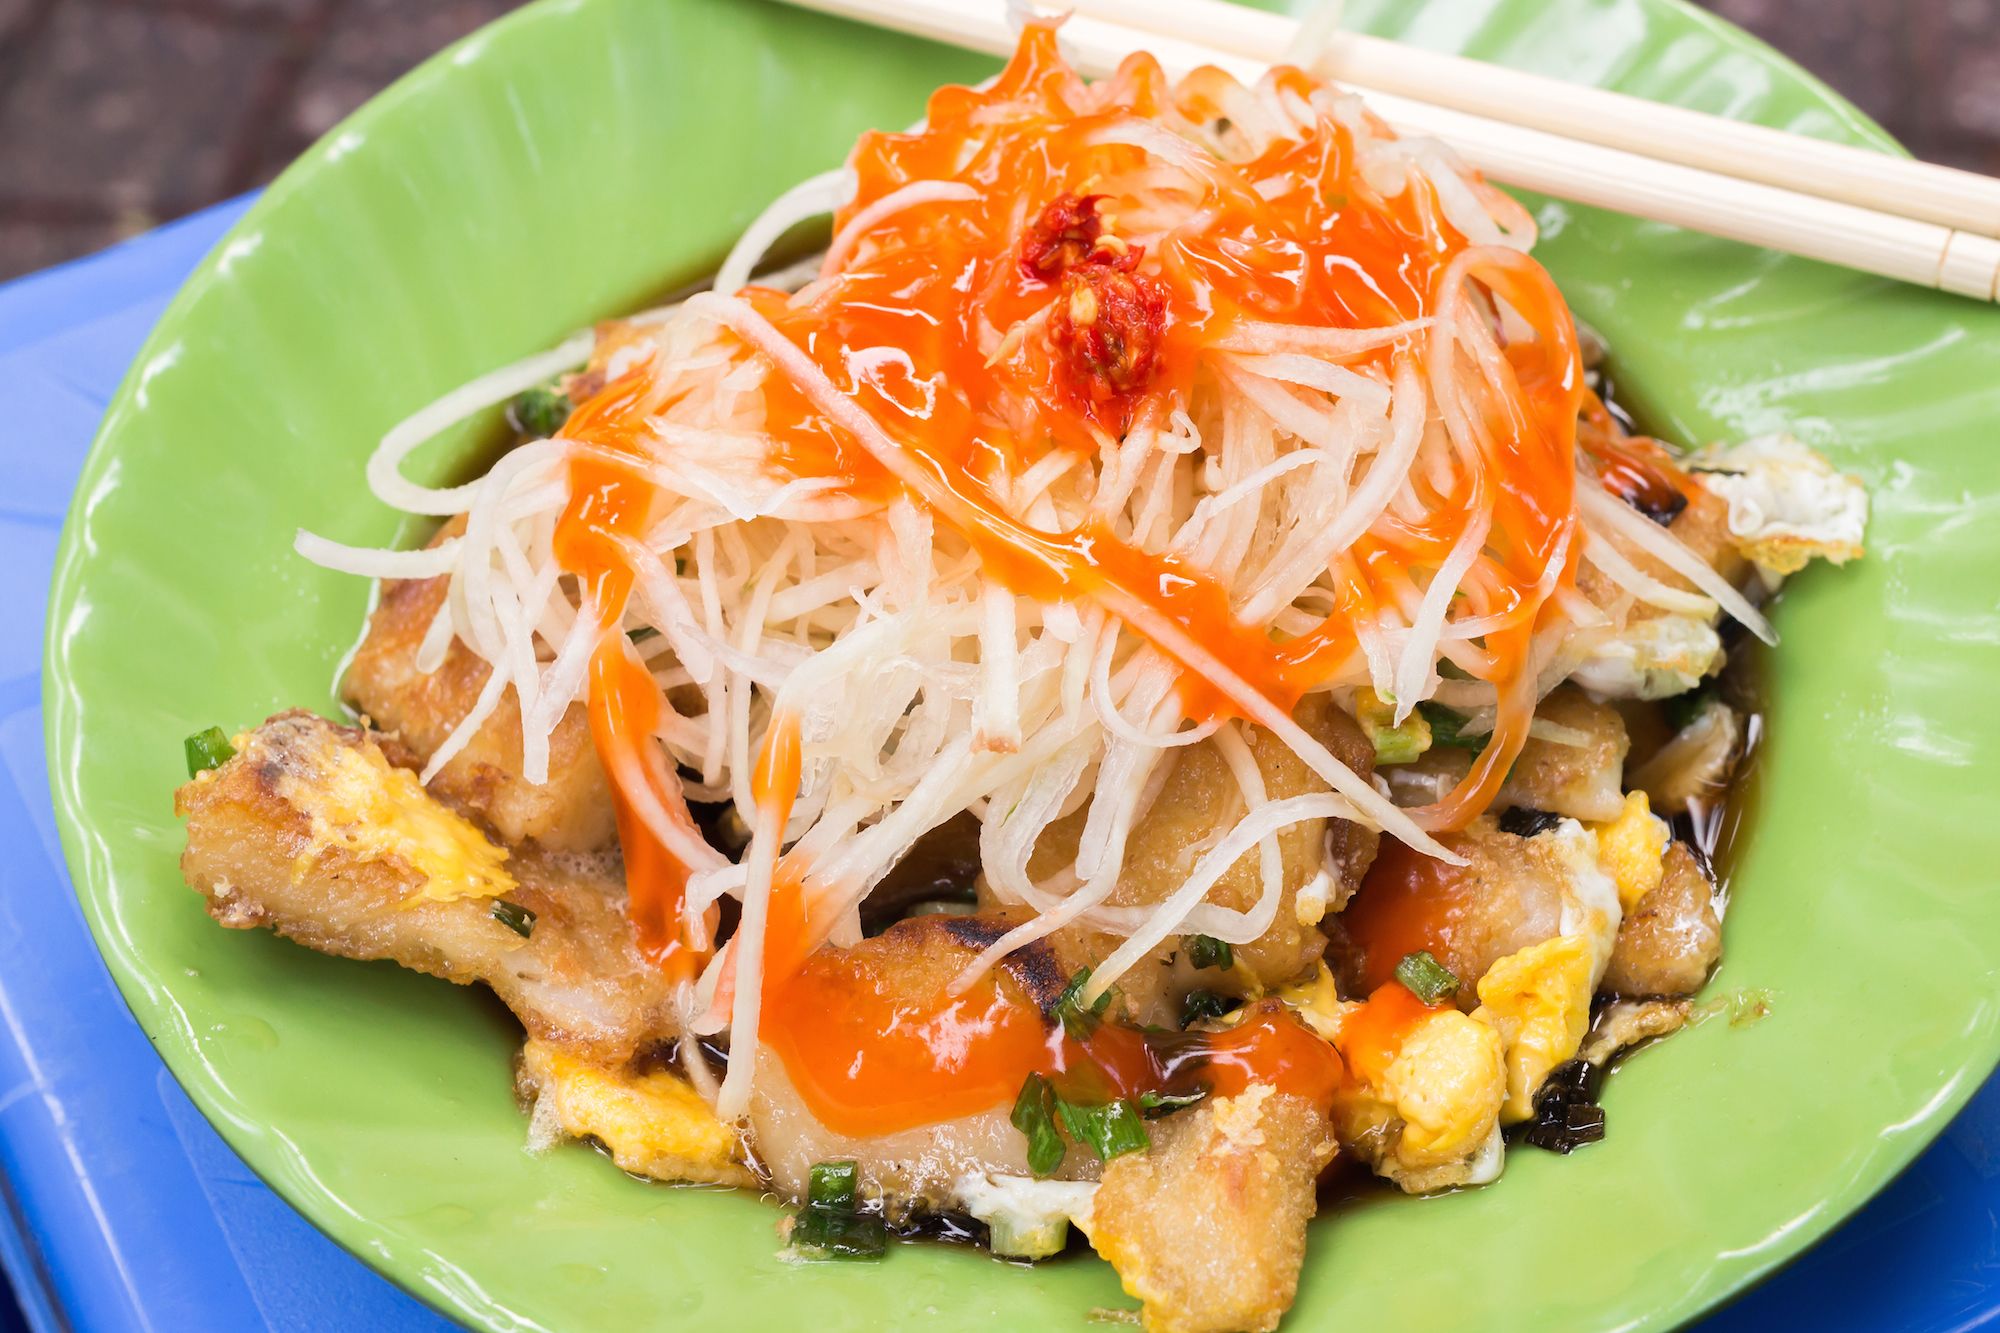 Vietnamese food: 40 delicious dishes to try in Vietnam | CNN